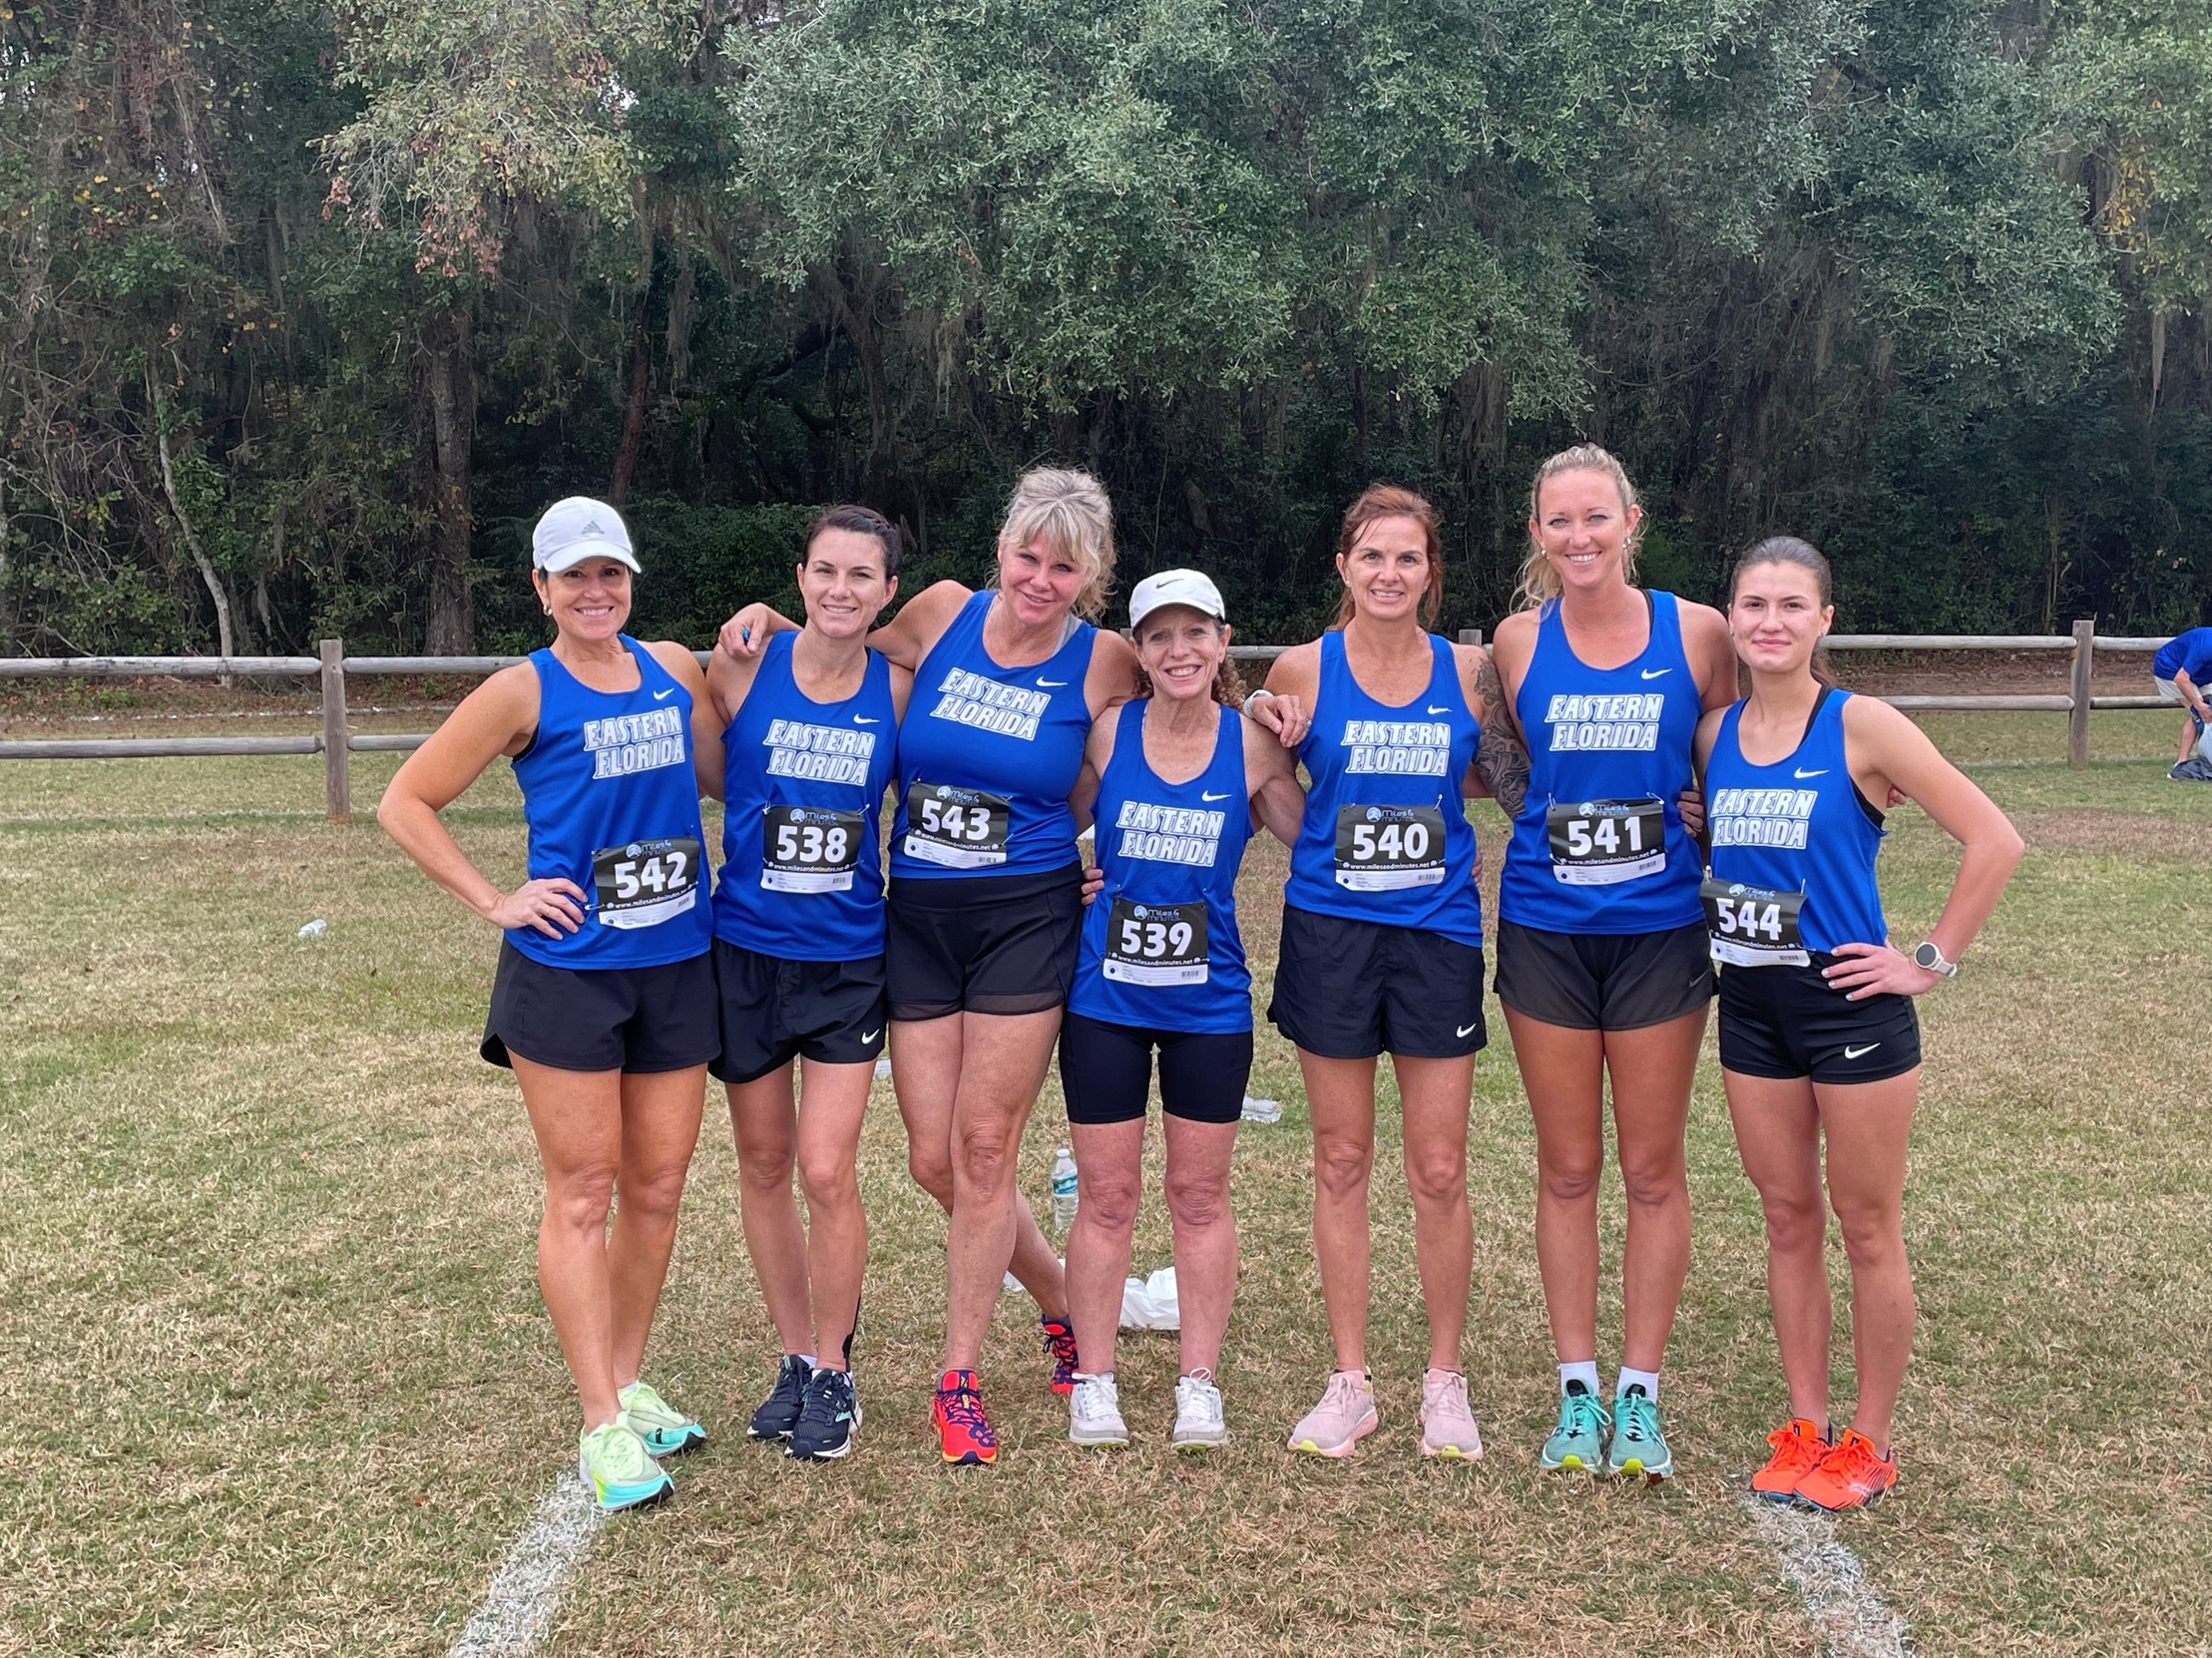 Women's cross country team set to compete at FSU Invite